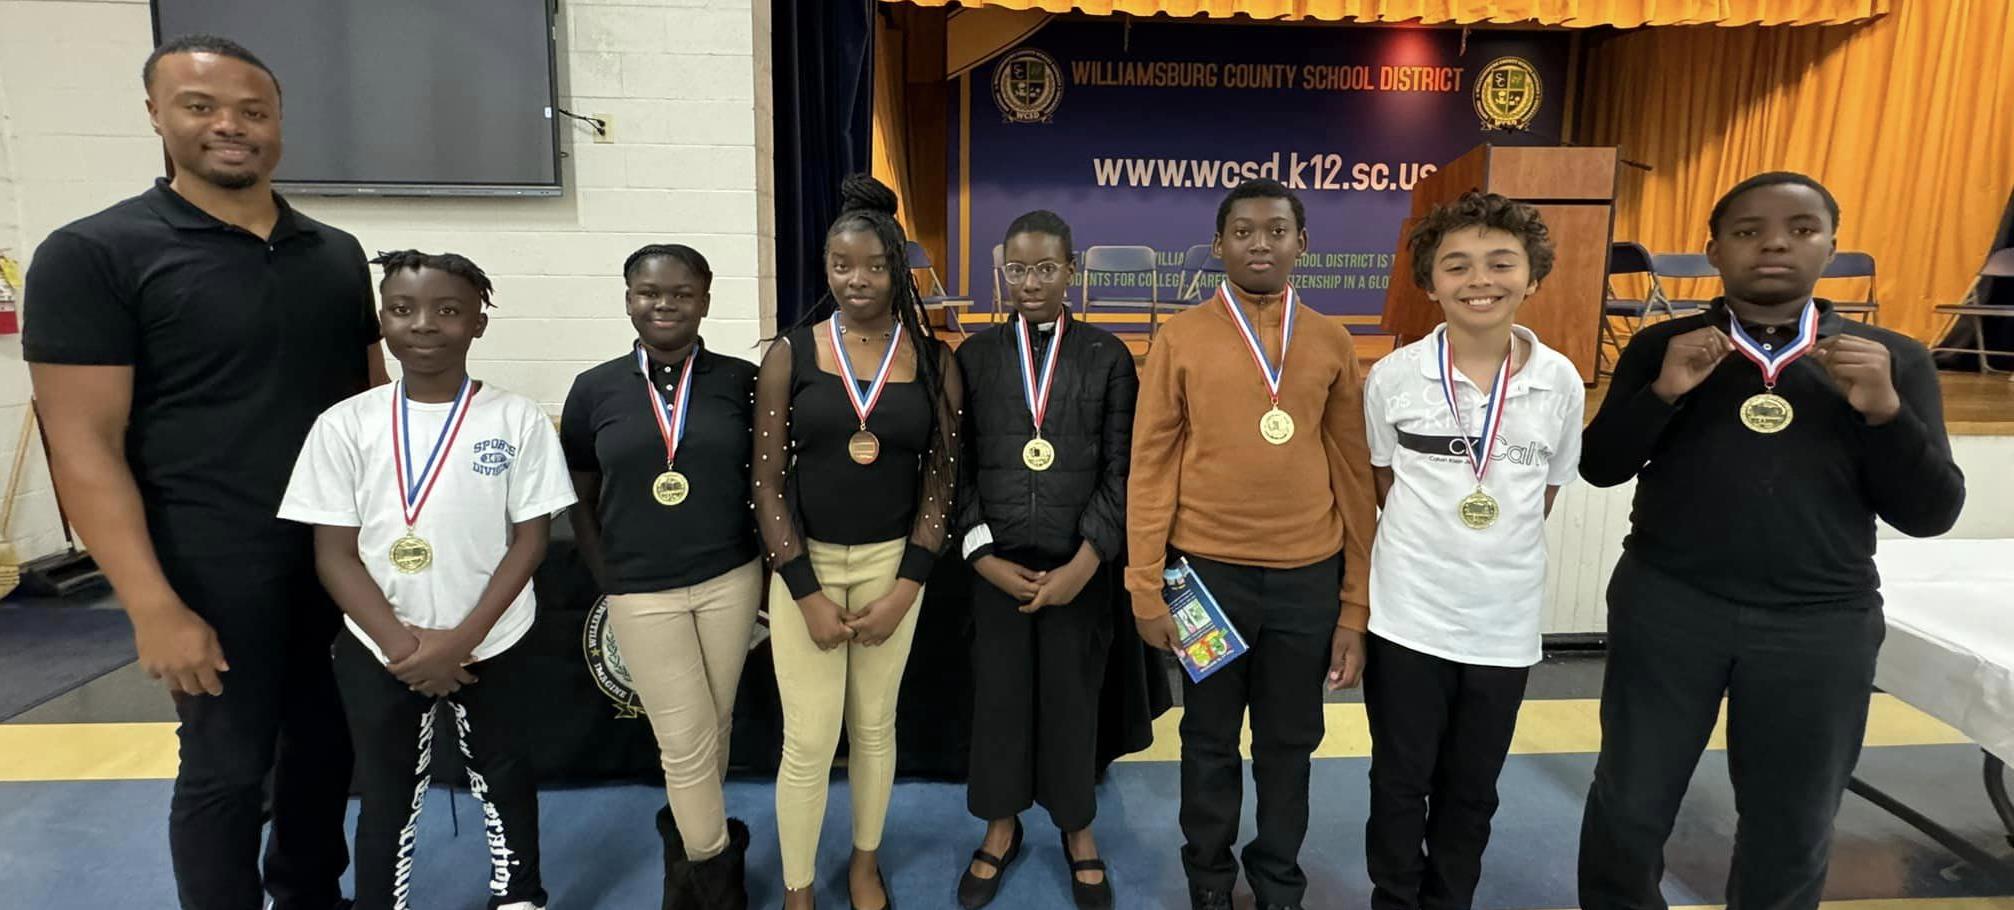 students standing with adult wearing award medals